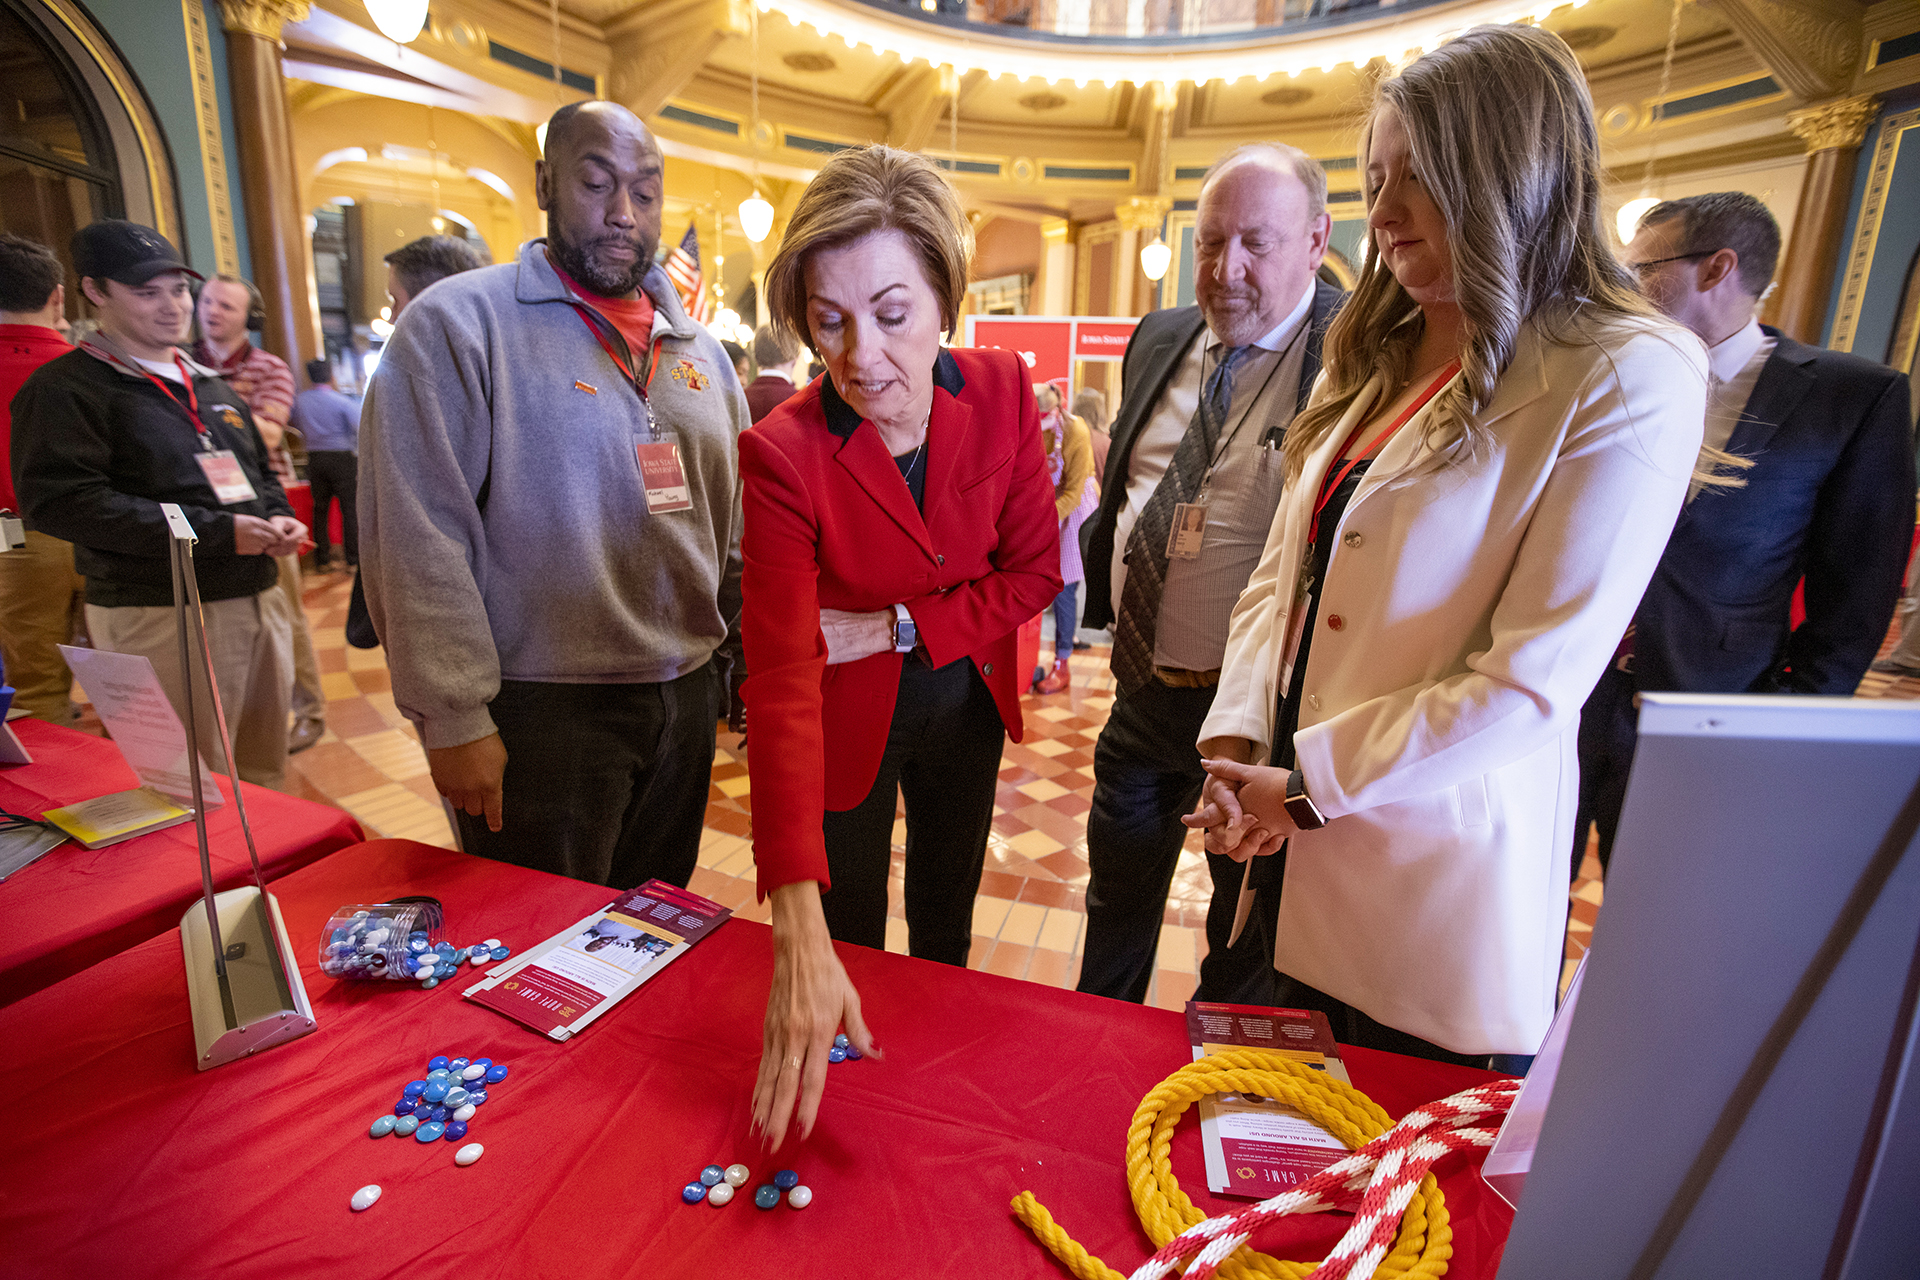 Michael Young shows Gov. Kim Reynolds how to play an interactive math game